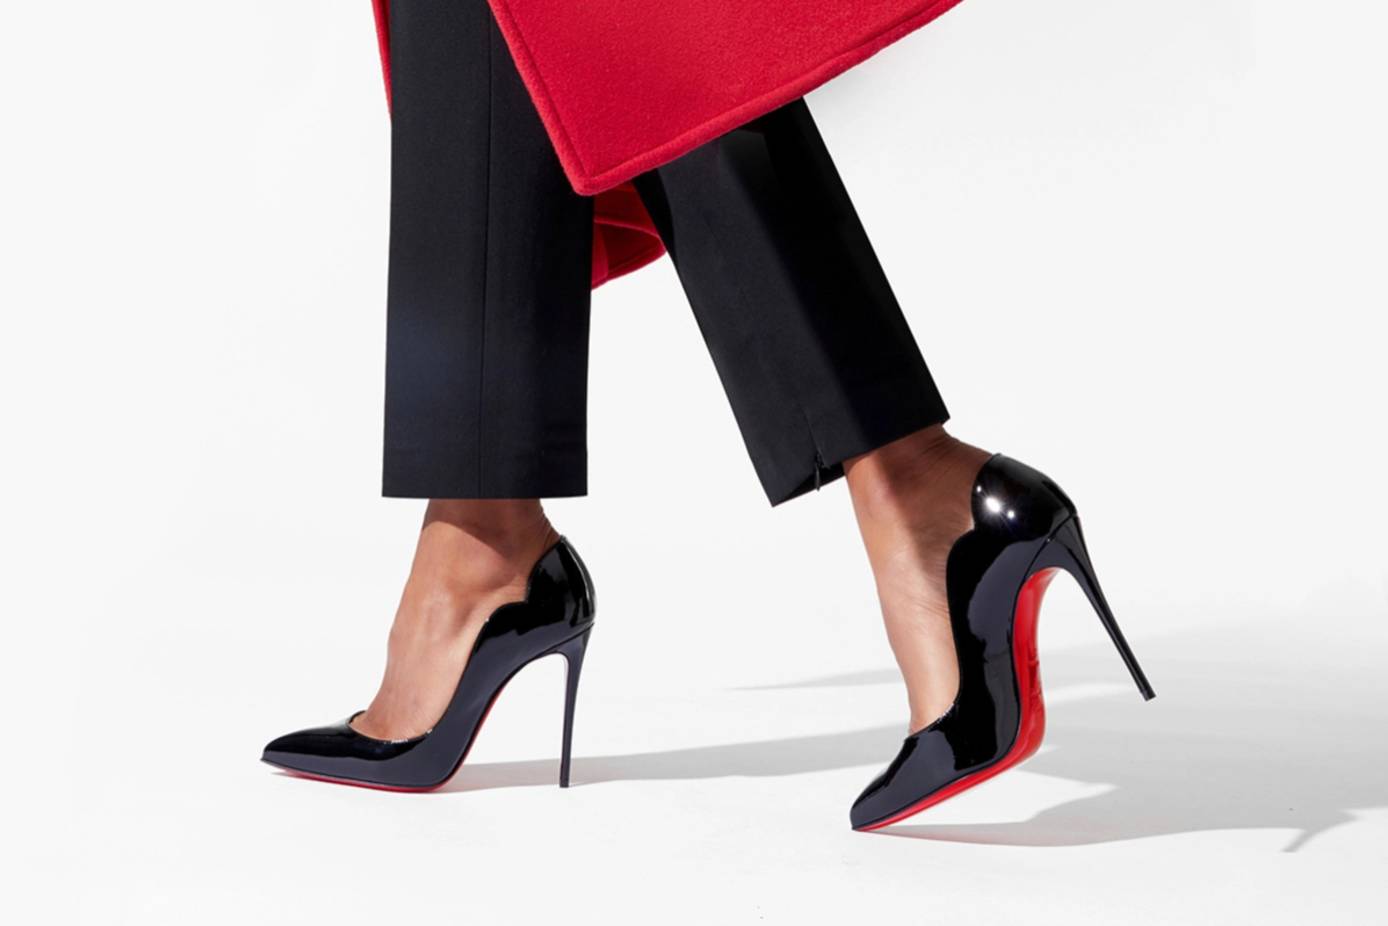 How Christian Louboutin created his famous red soled shoes - High